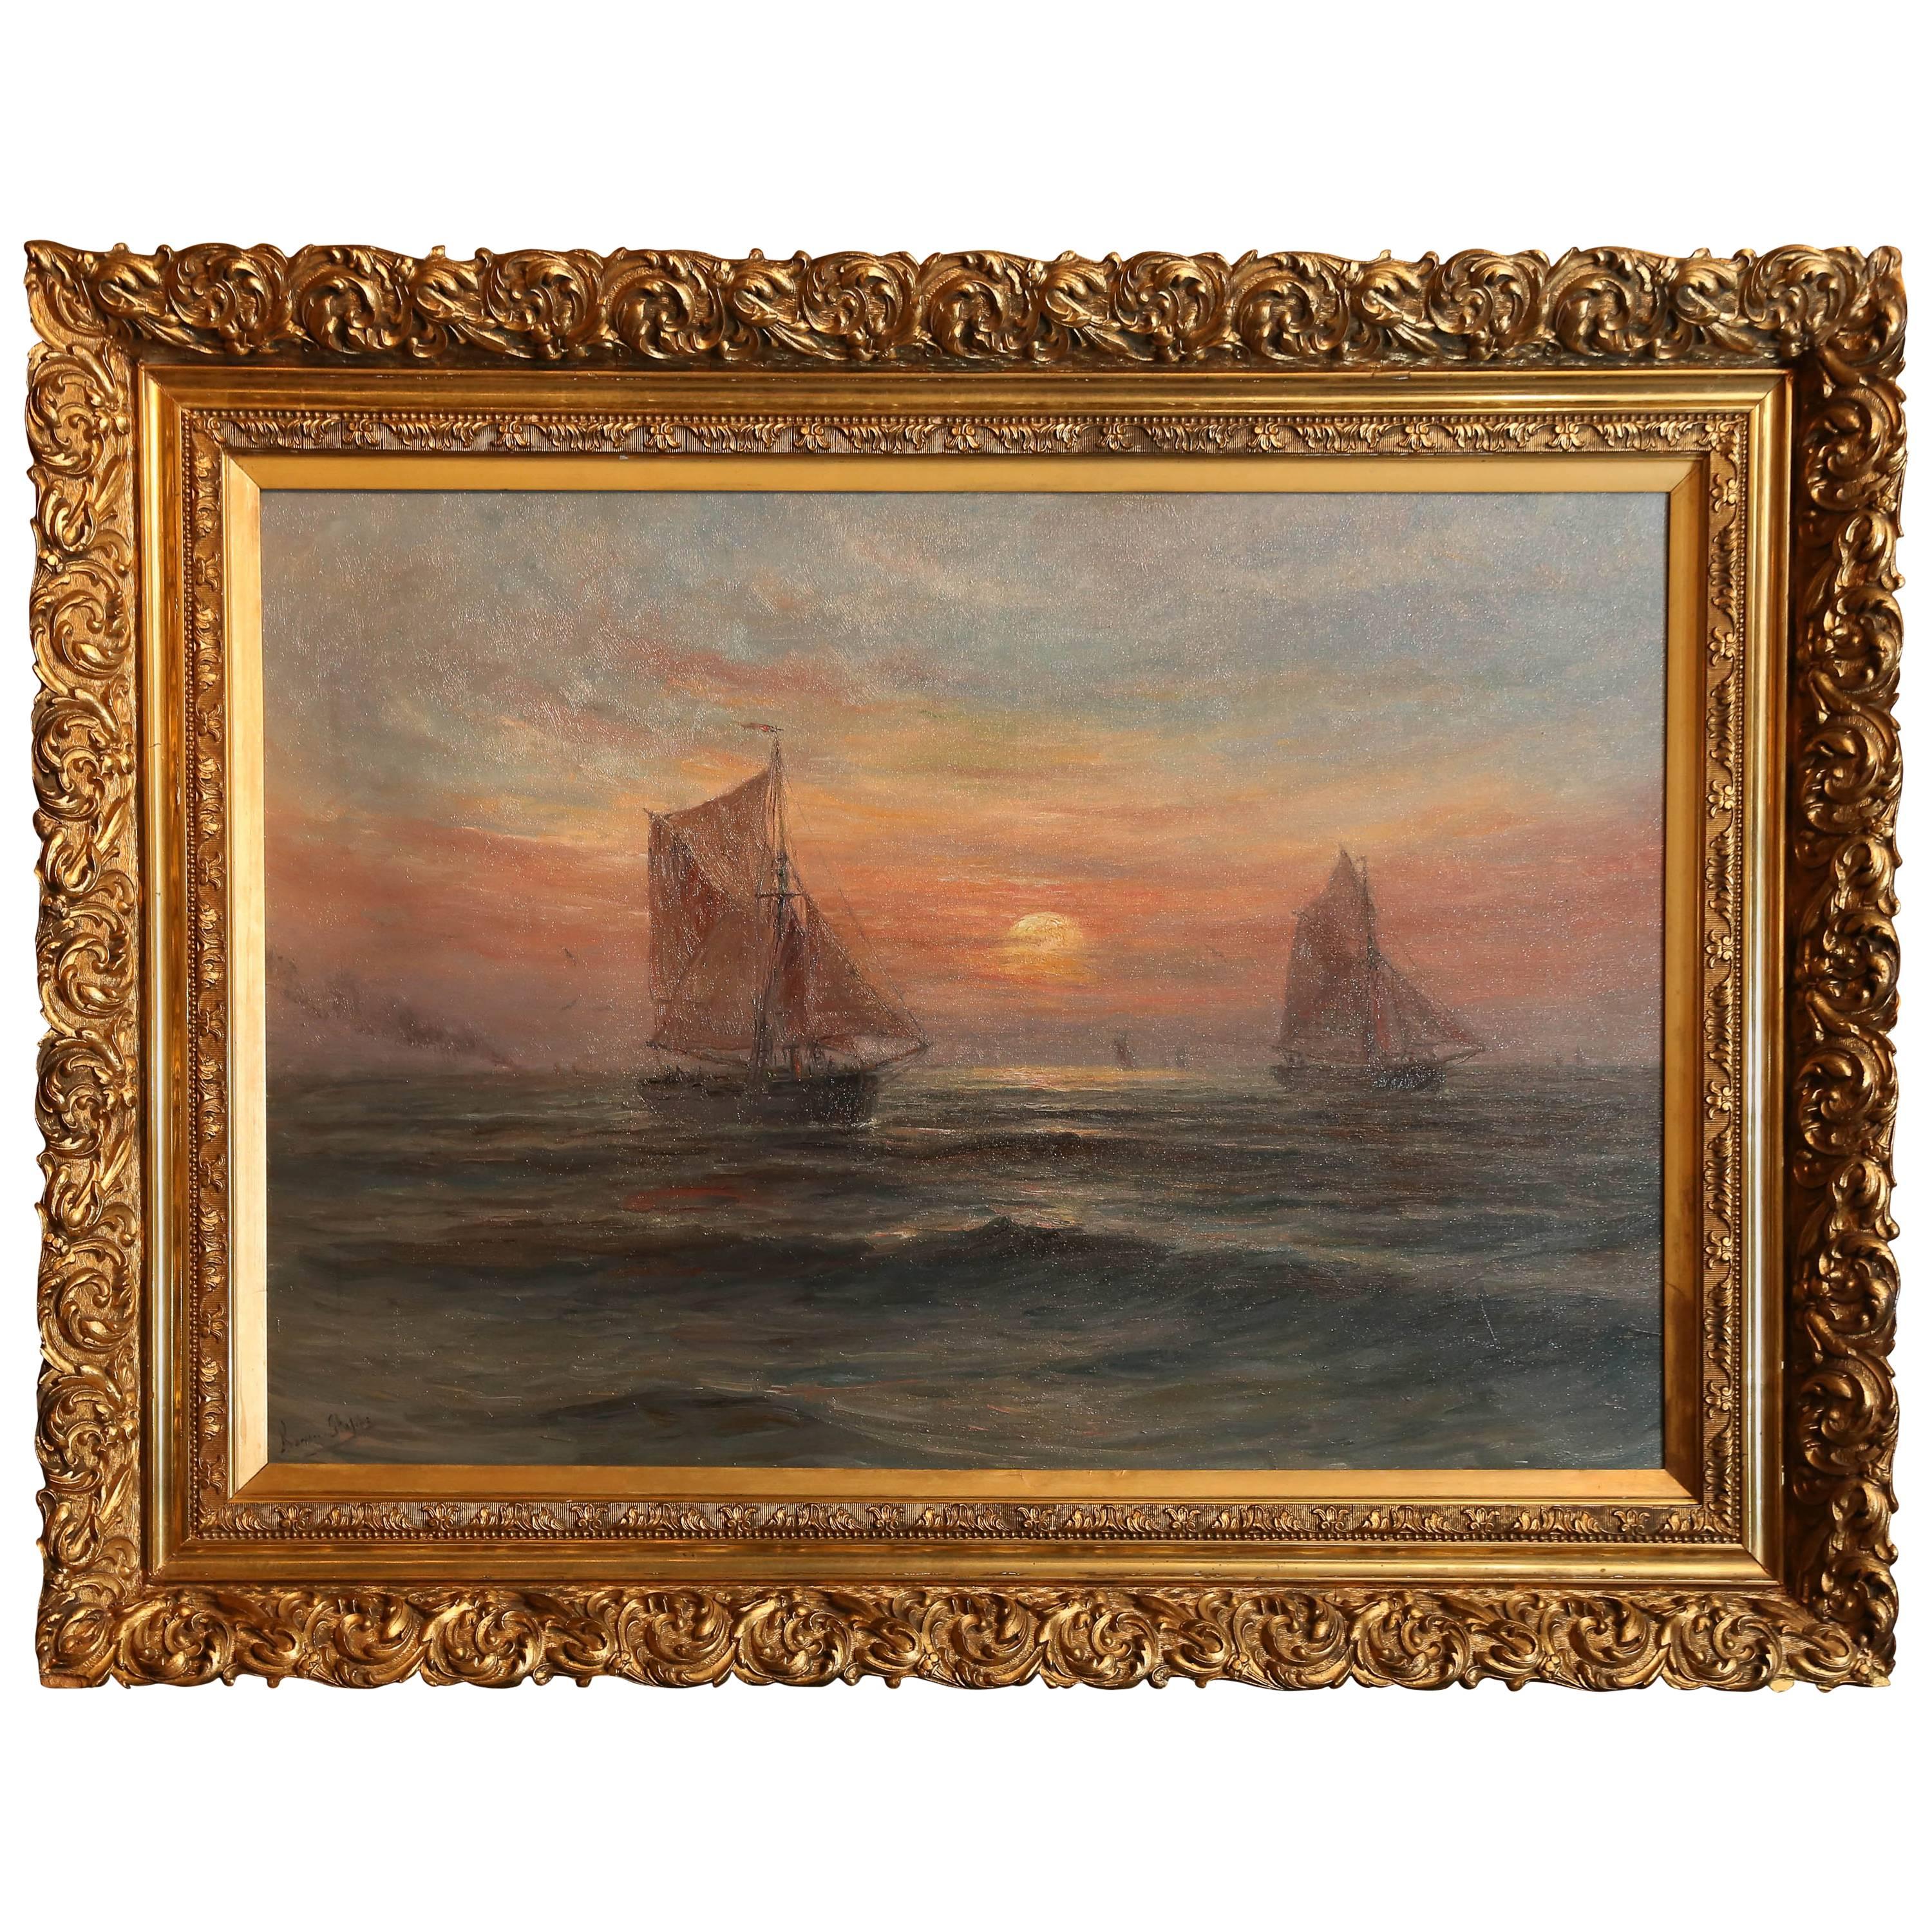 Oil on Canvas, Ships at Sunset Signed Lower Left "Romain Steppe"